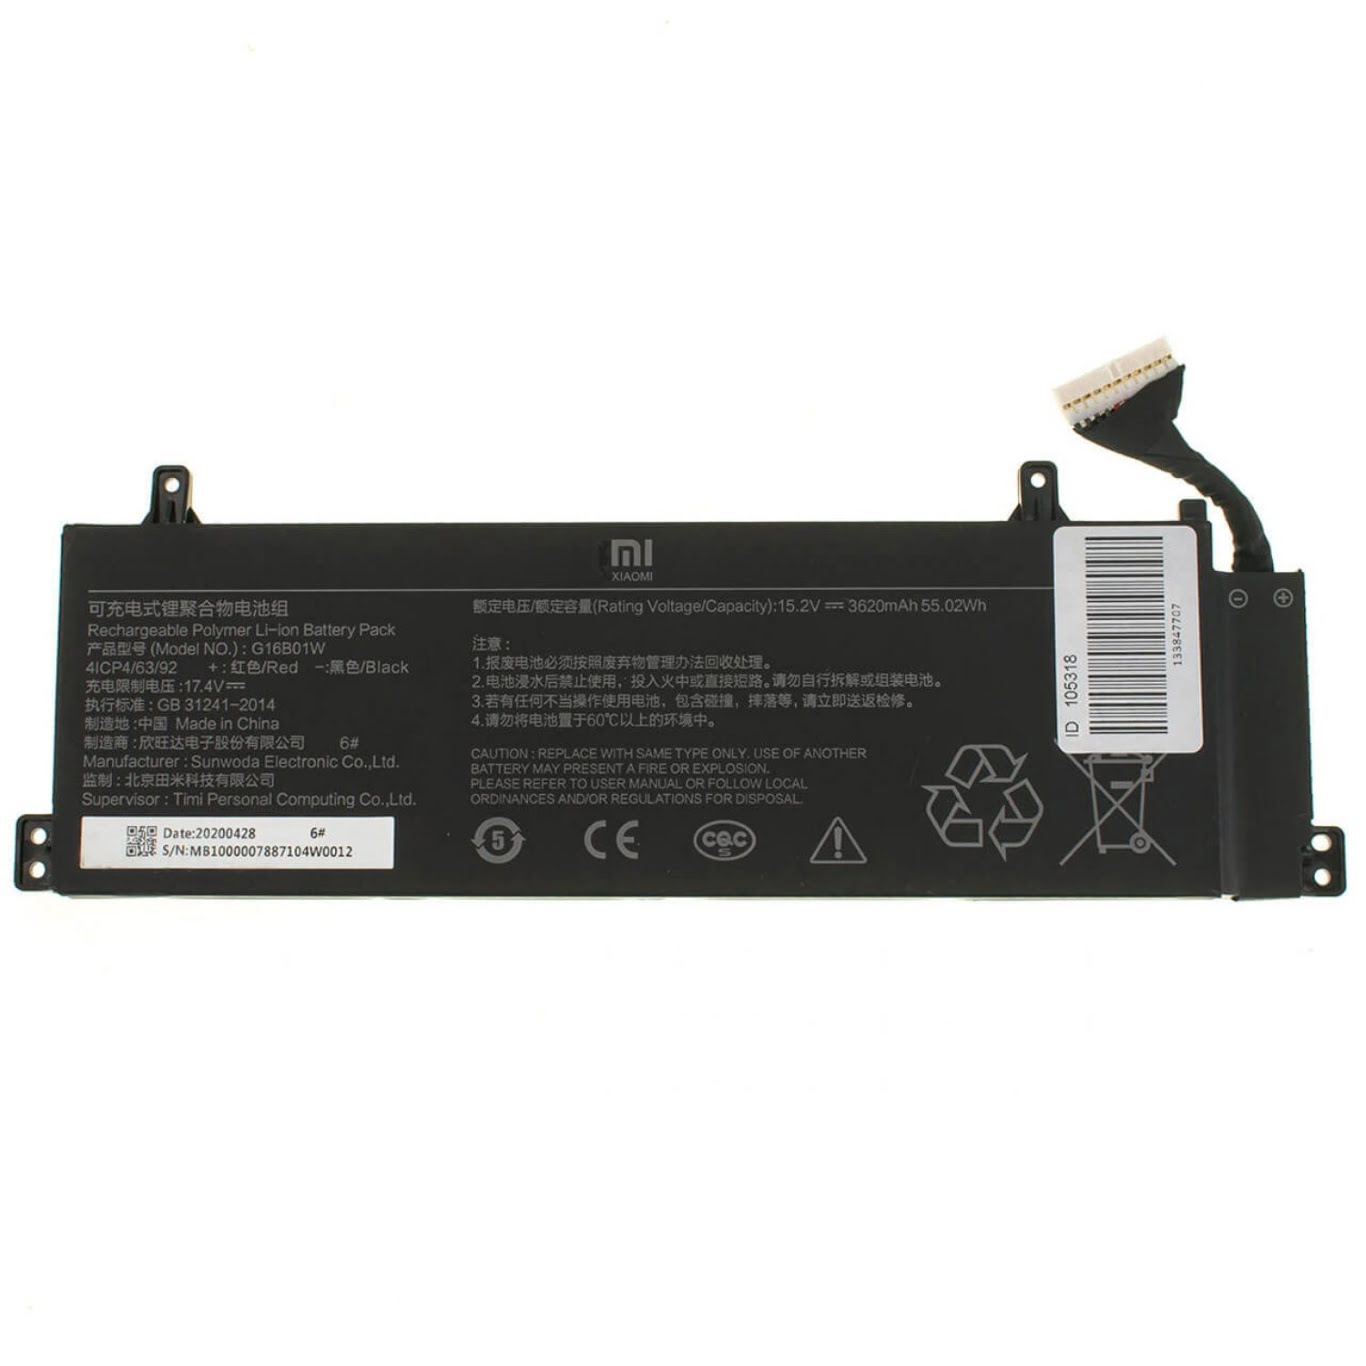 G16B01W replacement Laptop Battery for Xiaomi Redmi G 16.1 Gaming Series, 4 cells, 15.2v, 3620mah / 55.02wh